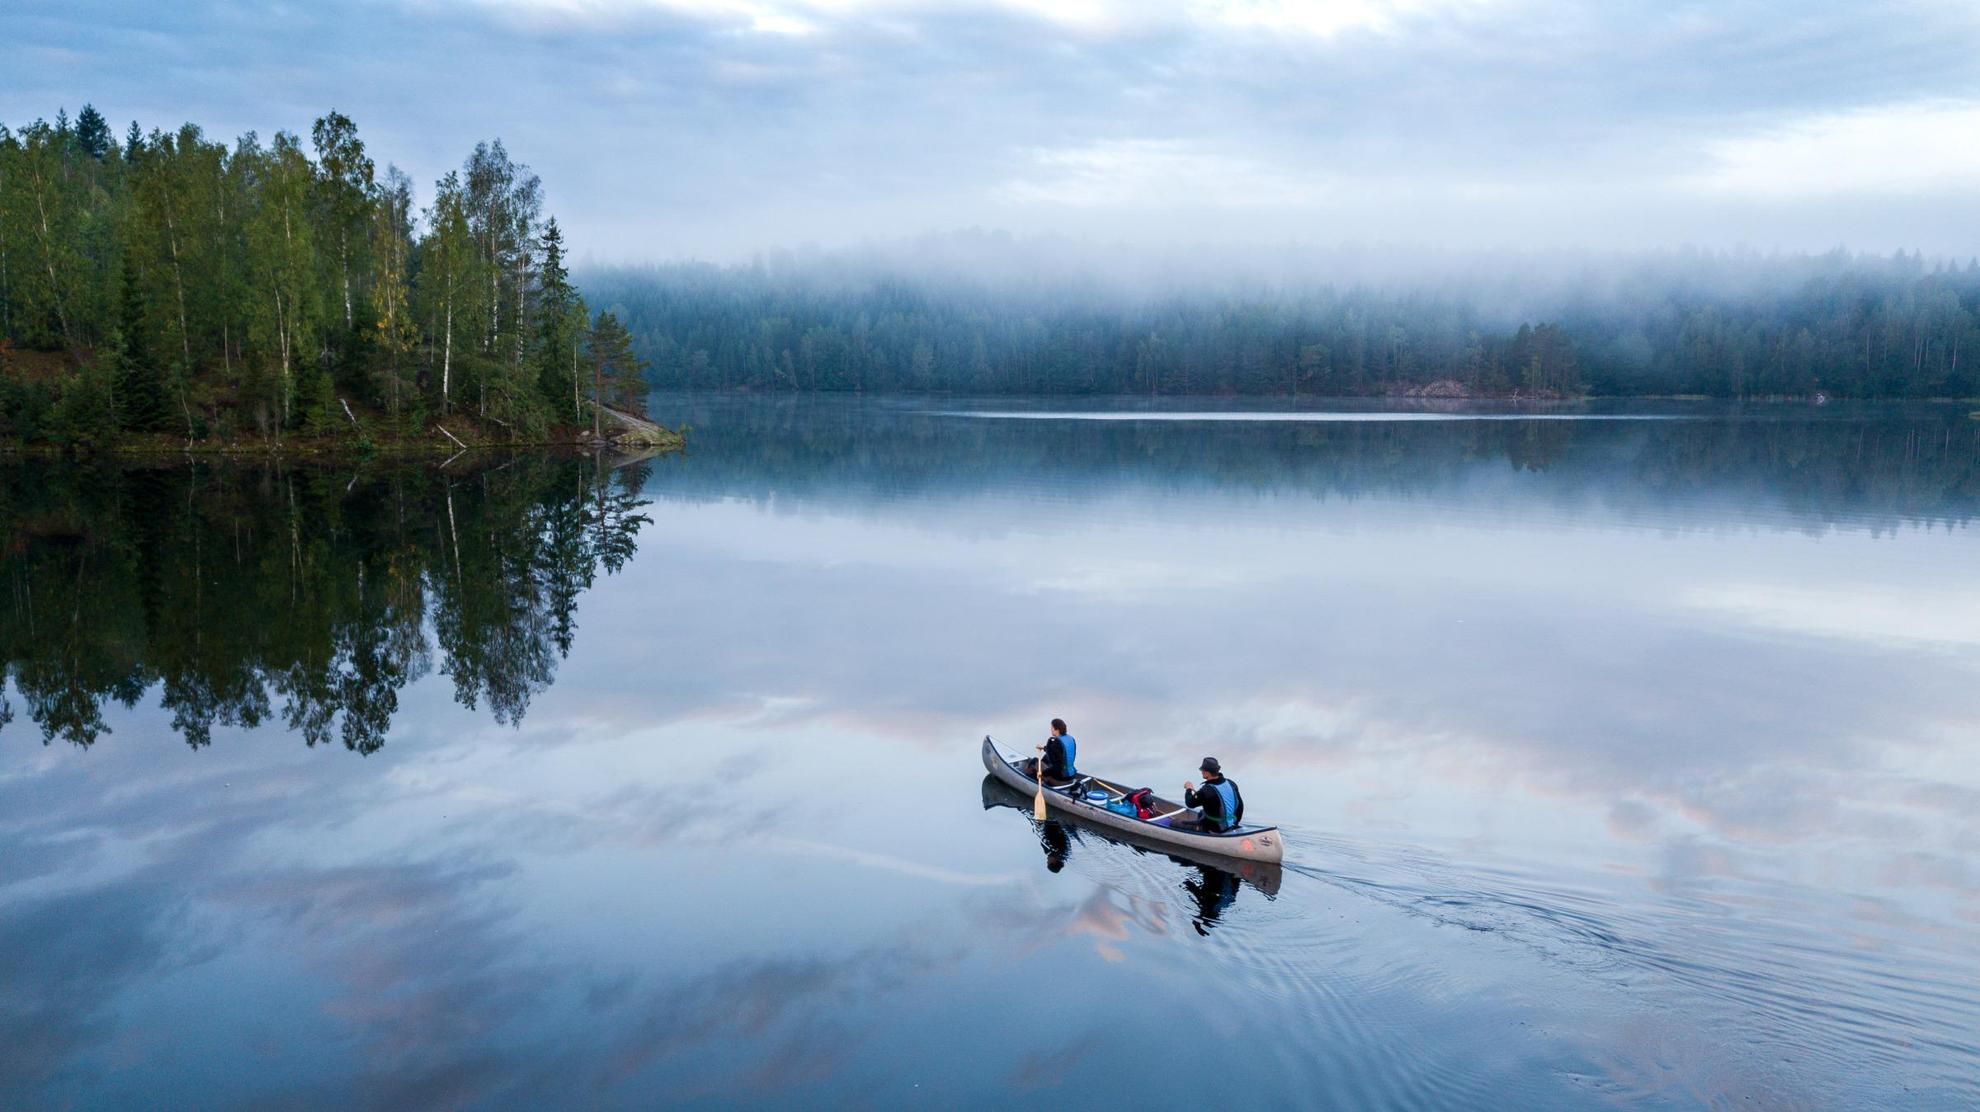 Two people are canoeing on a calm lake surrounded by forest. The fog is above the tree tops in the background.